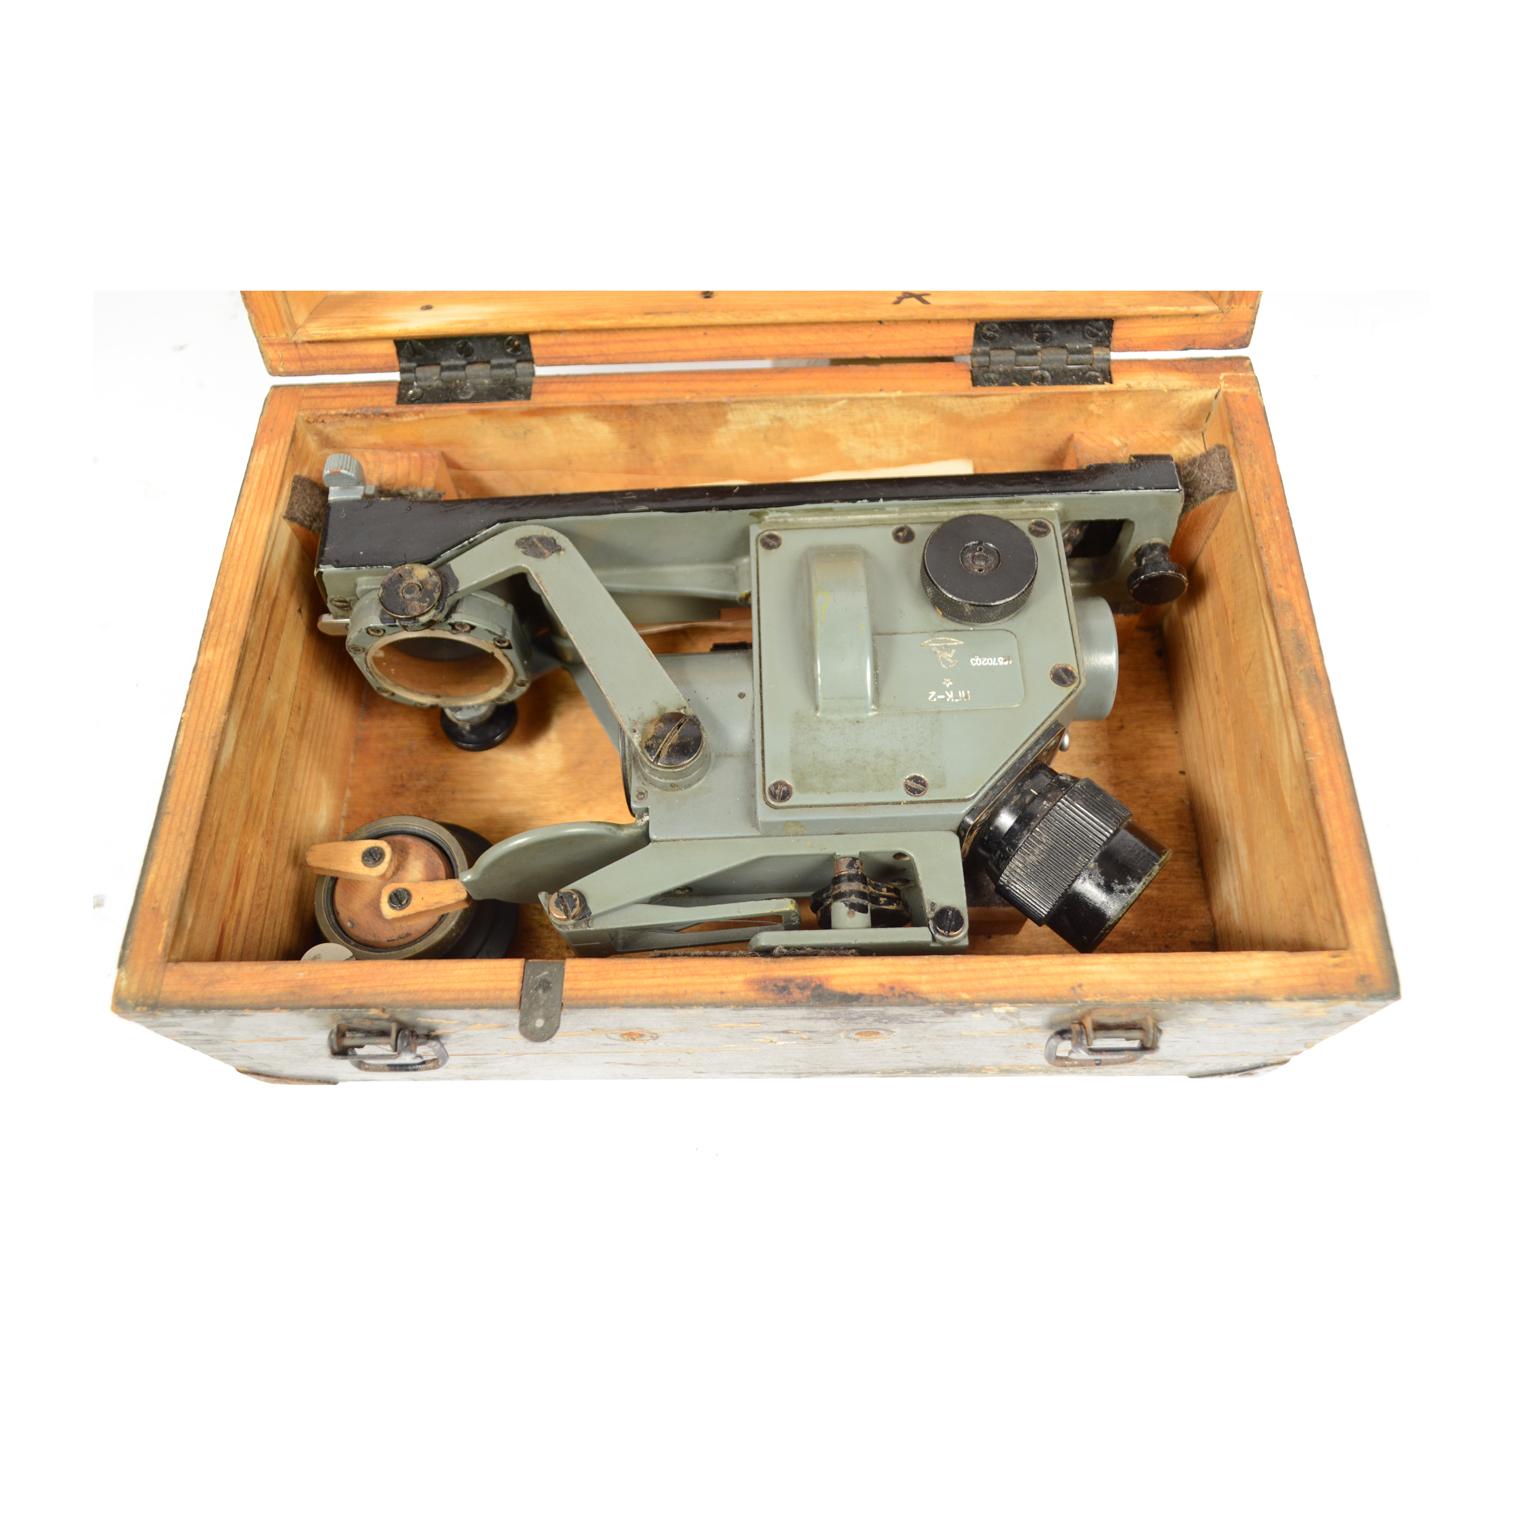 World War II sextant made in Russia, of gray painted metal complete with original wooden box with accessories. Good condition. Measures: Box 31 x 20 cm H 12.8 - inches 12.2 x 7.87 H 5.
Shipping in insured by Lloyd's London and the gift box is free